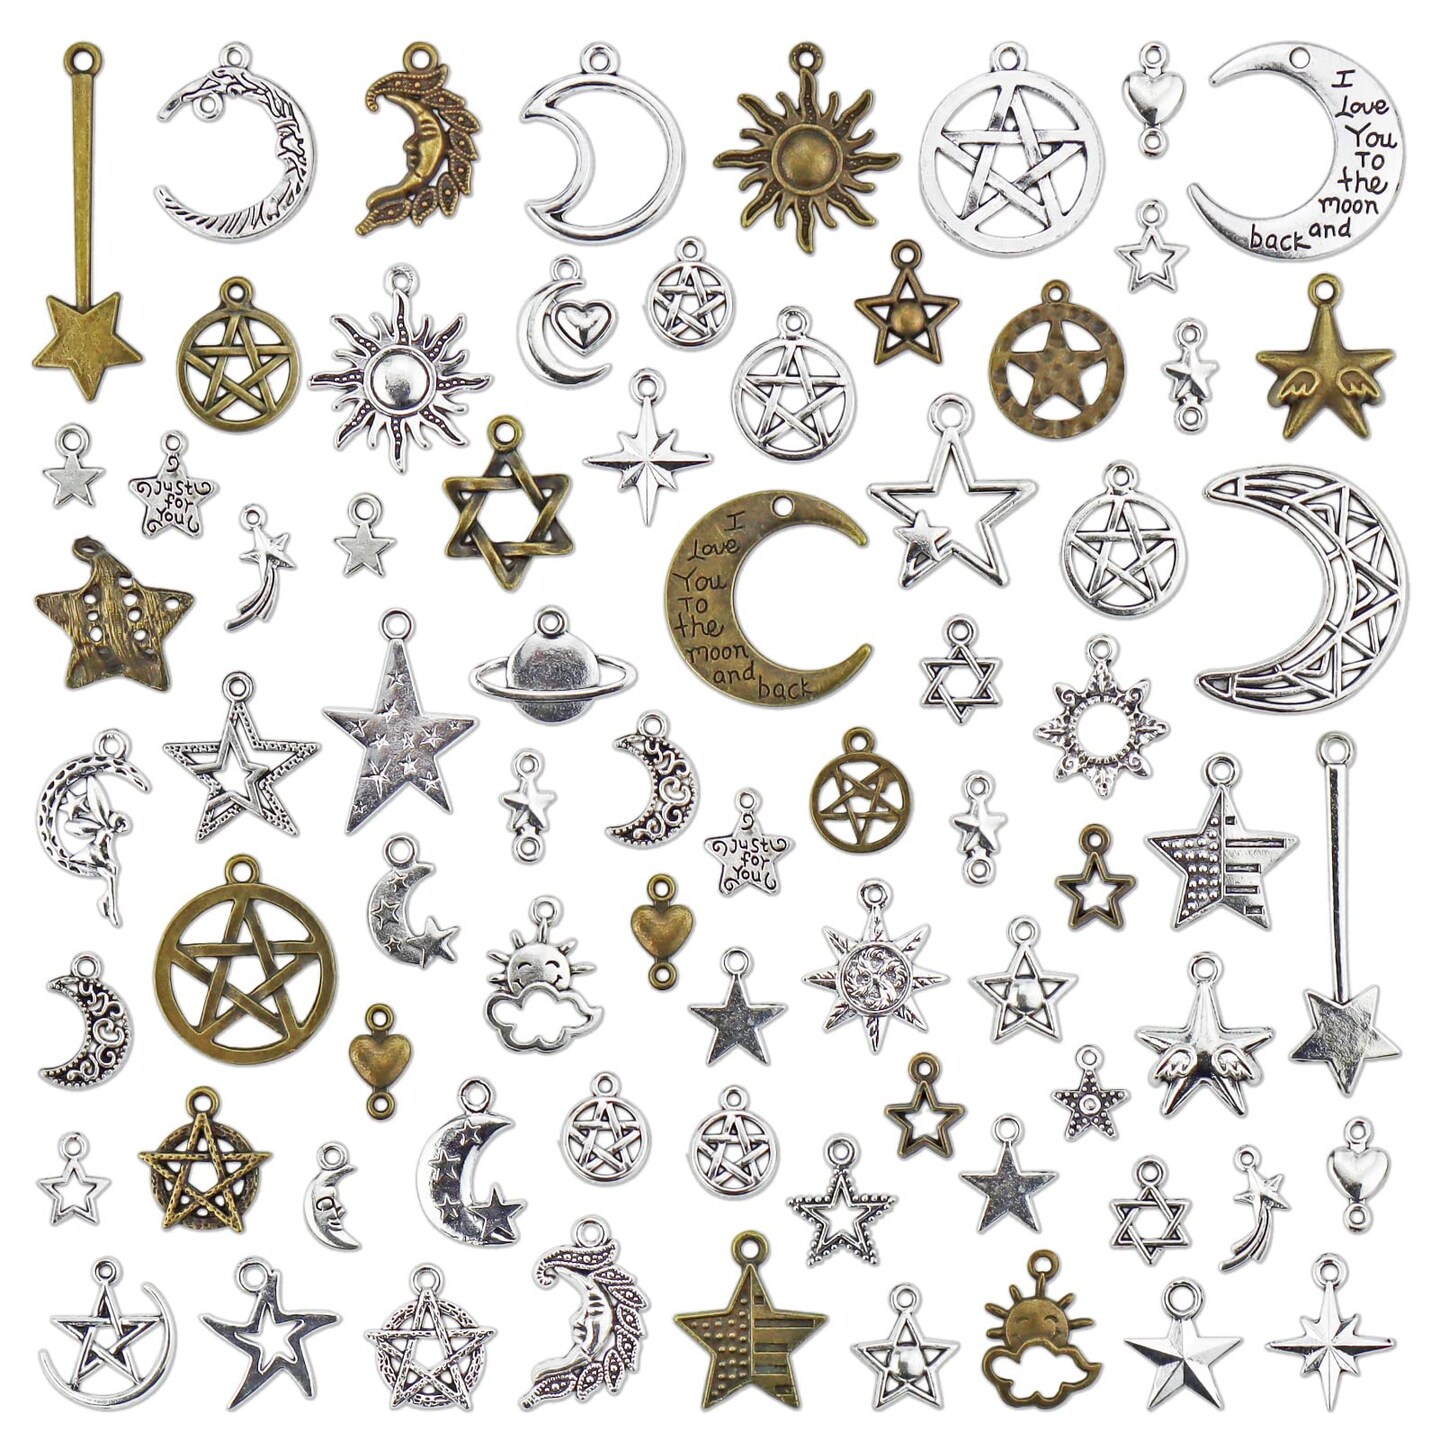 JIALEEY Celestial Mixed Sun Moon Star Charms, Wholesale Bulk Lots Antique  Alloy Charms Pendants DIY for Necklace Bracelet Jewelry Making and  Crafting, 100g(74PCS)